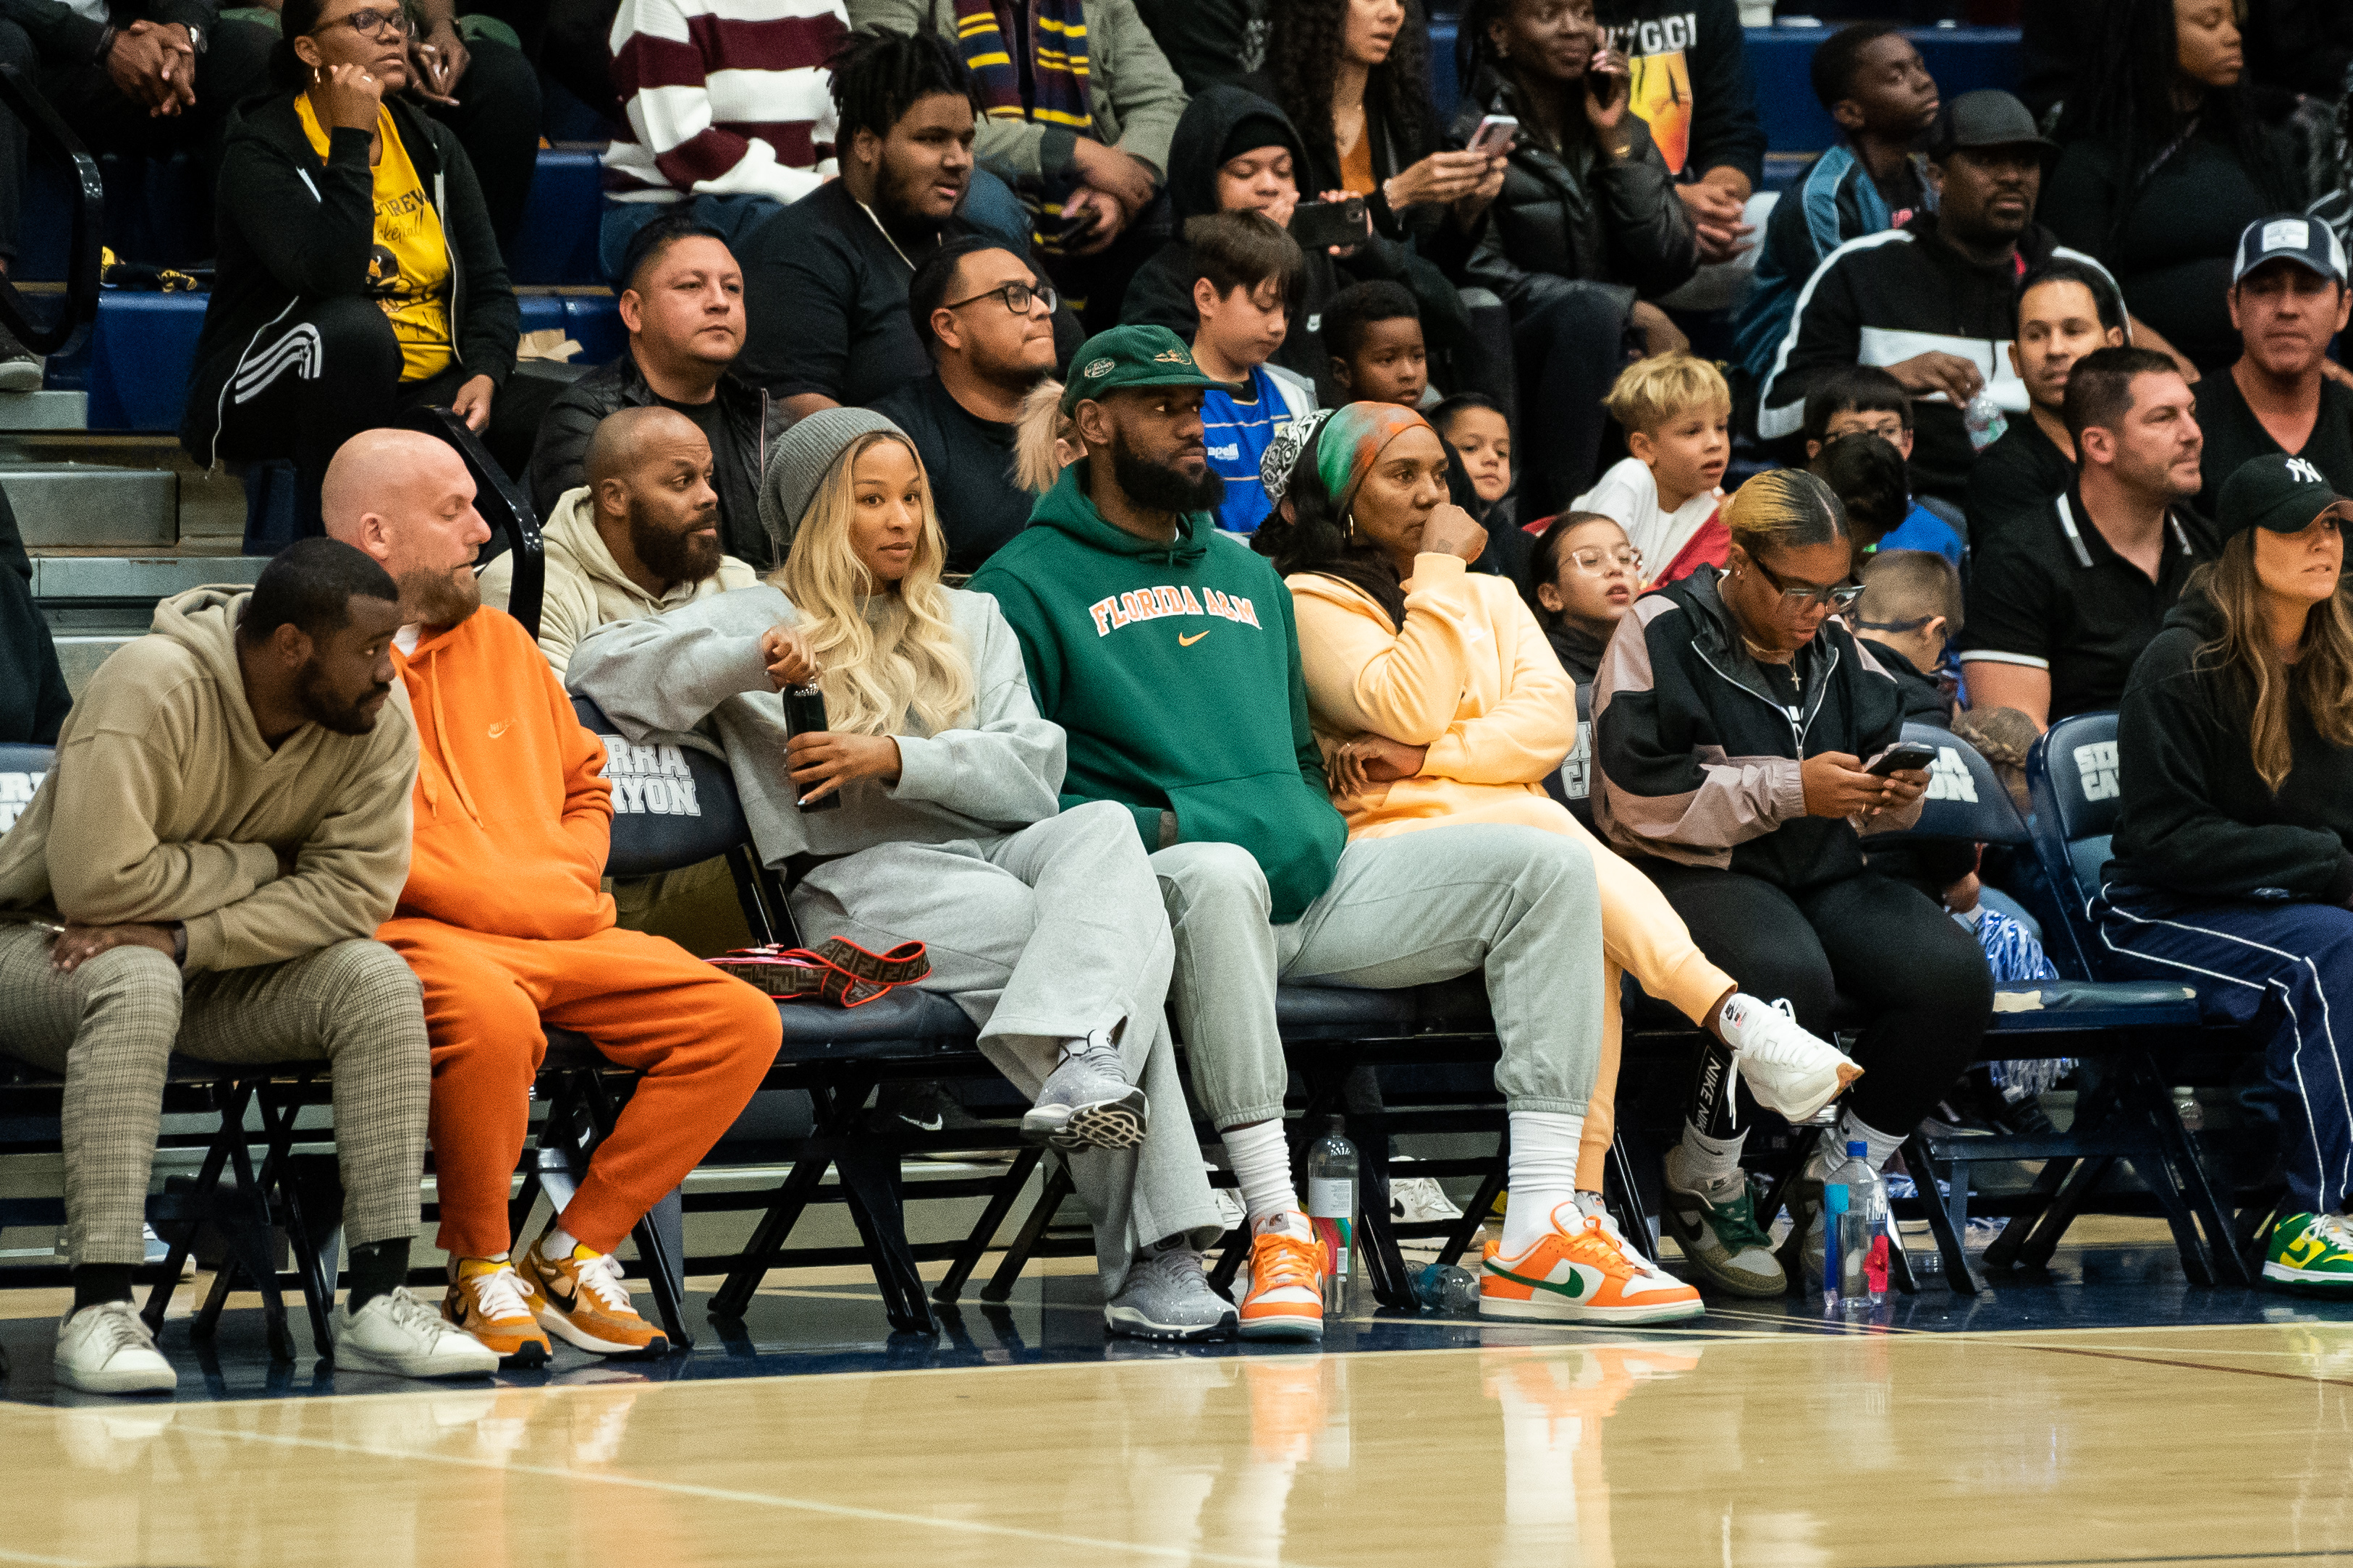 Savannah James, LeBron James, and Gloria James sit court side at the Sierra Canyon vs King Drew boys basketball game at Sierra Canyon High School on November 16, 2022, in Chatsworth, California | Source: Getty Images